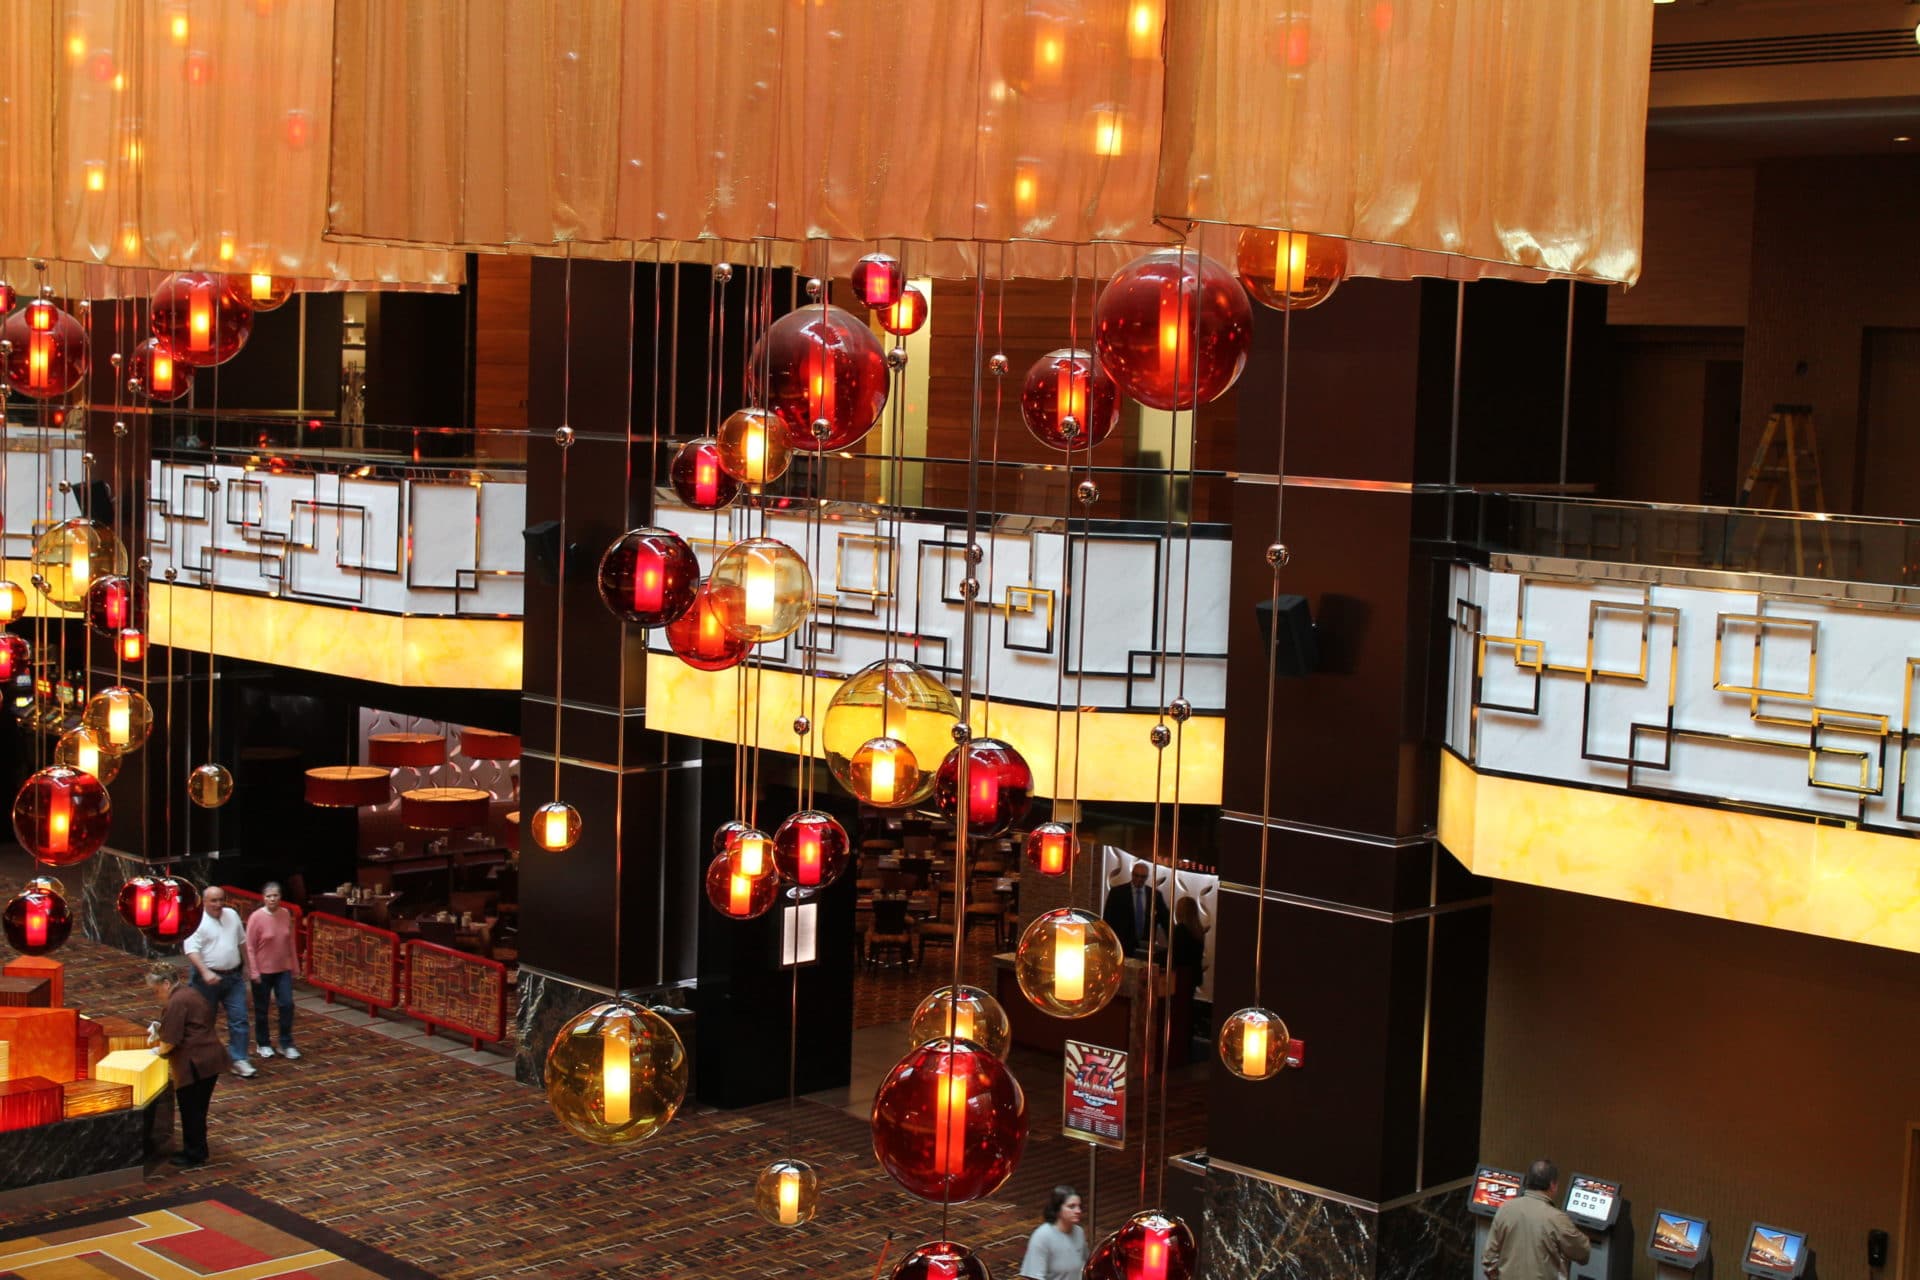 View of the Main Lobby of the Golden Nugget.